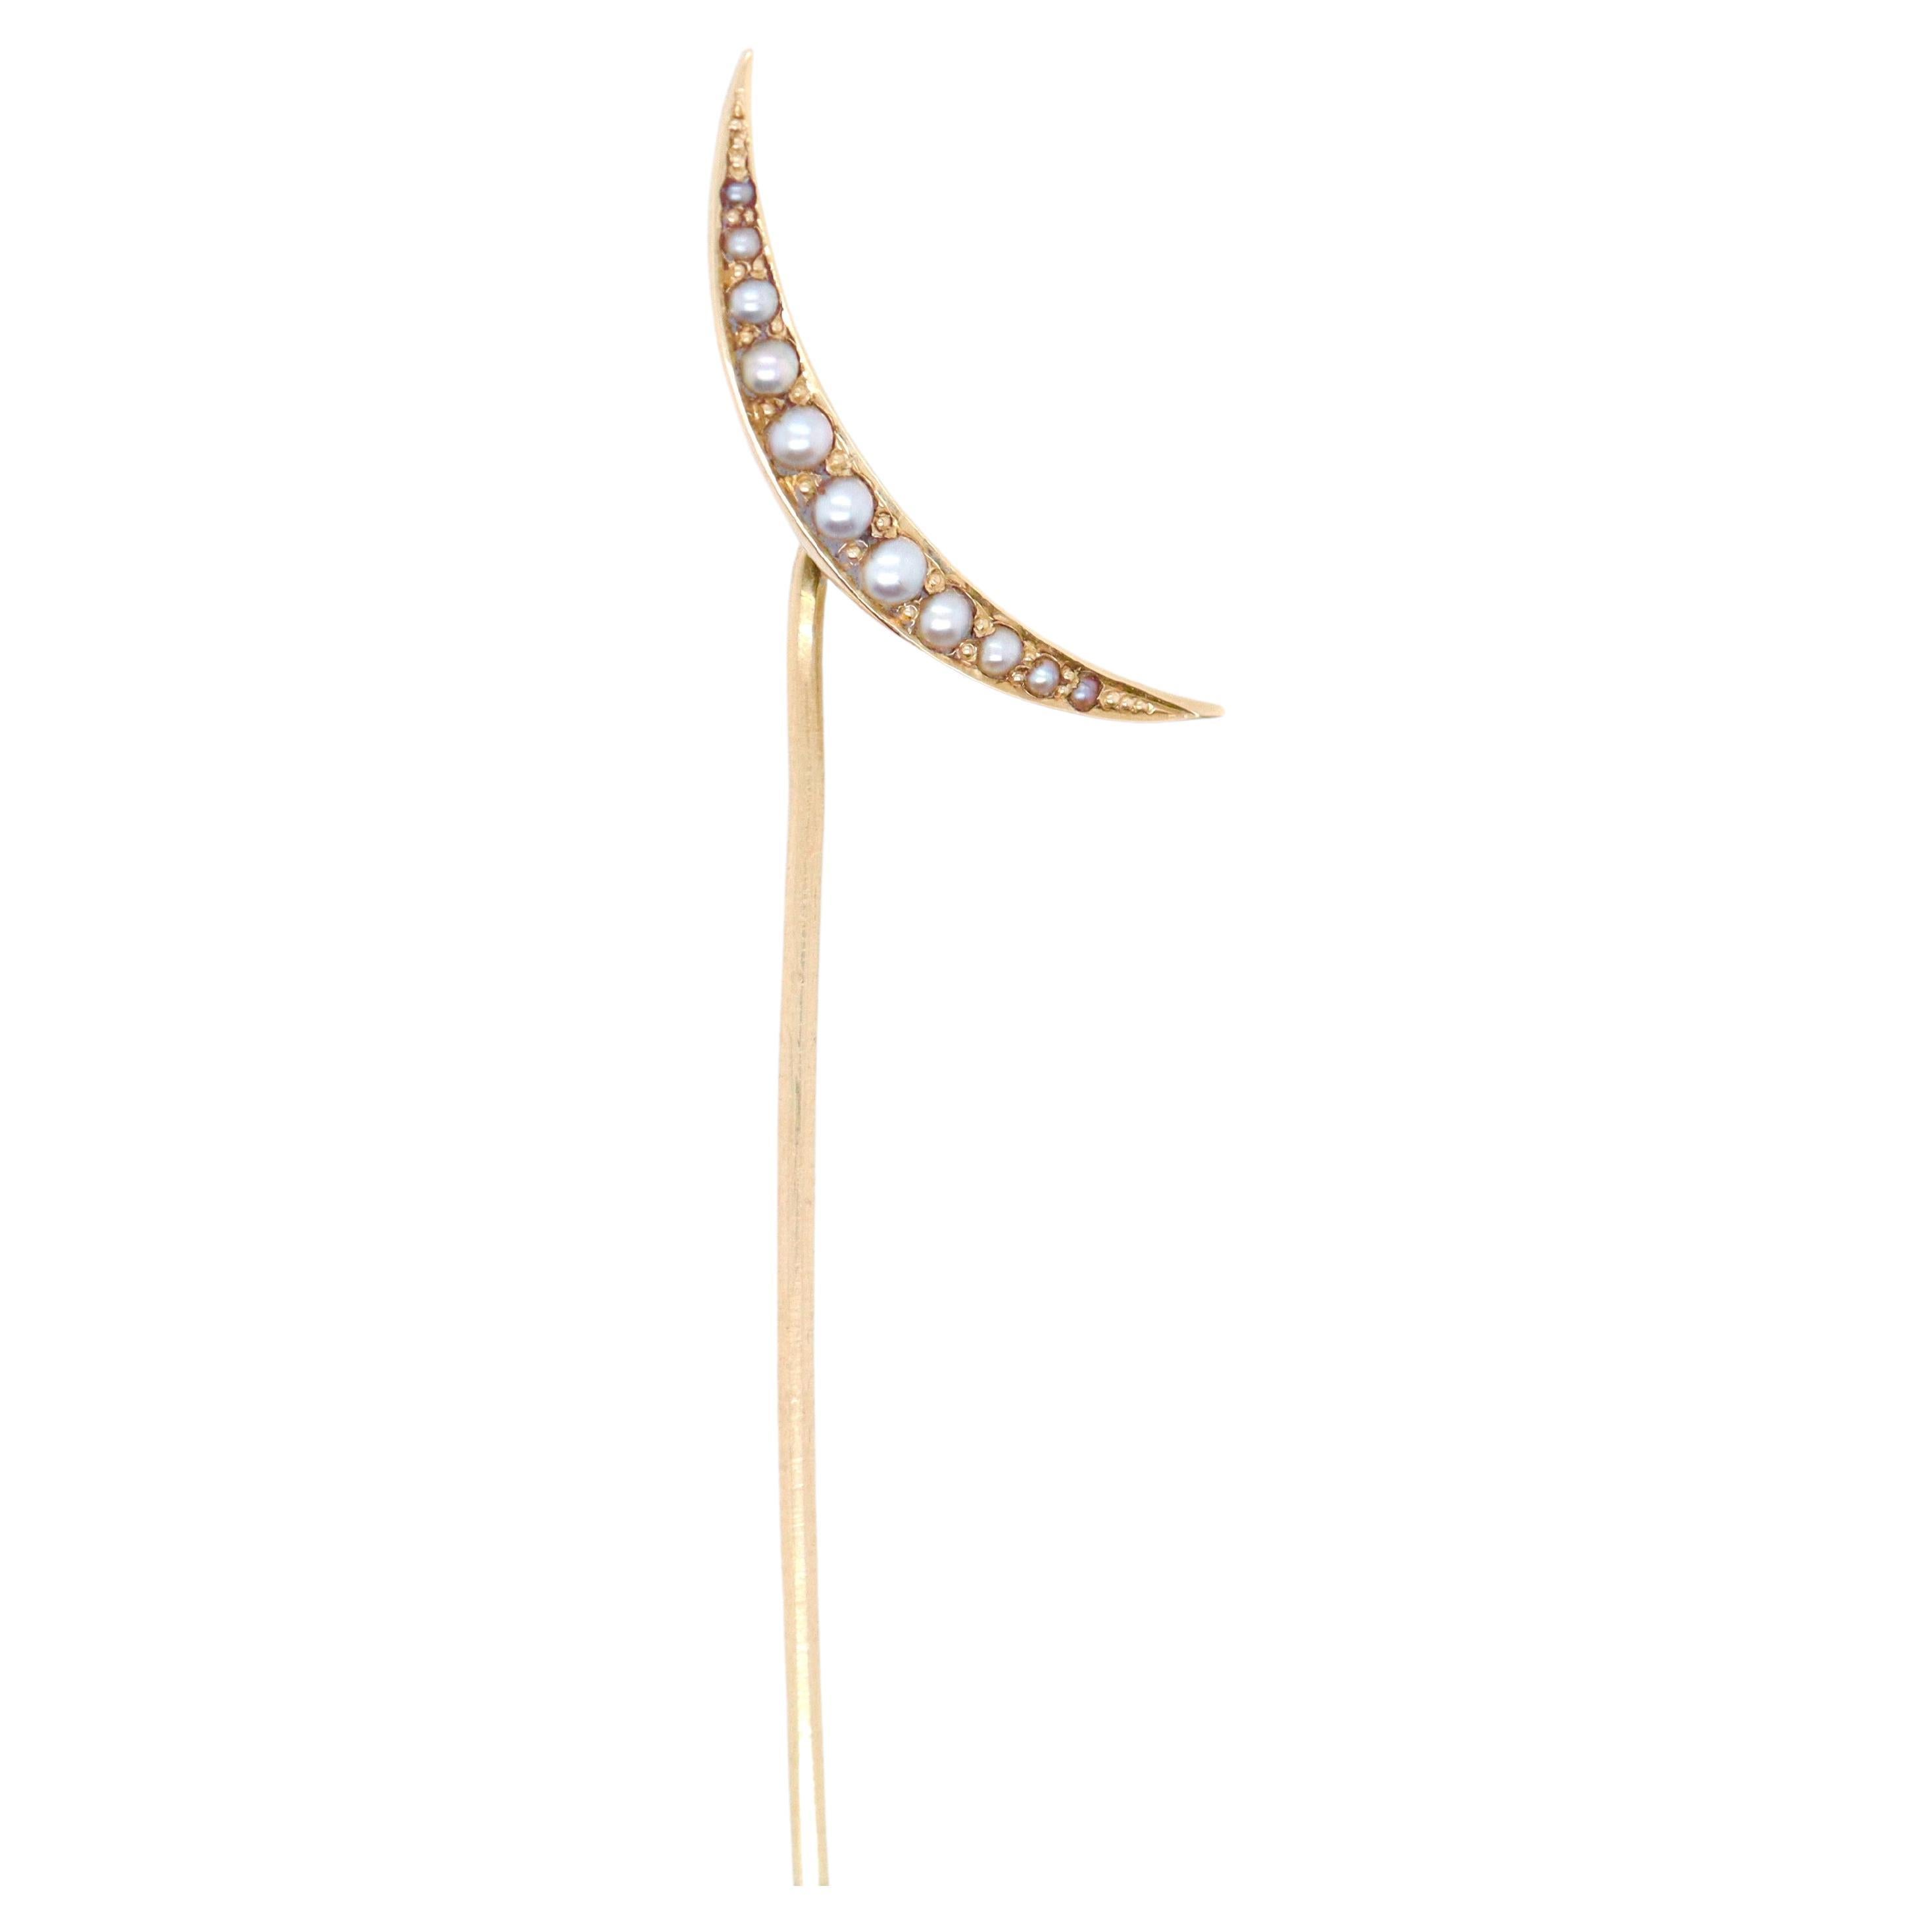 Antique 14k Gold & Seed Pearl Crescent Moon Stick Pin